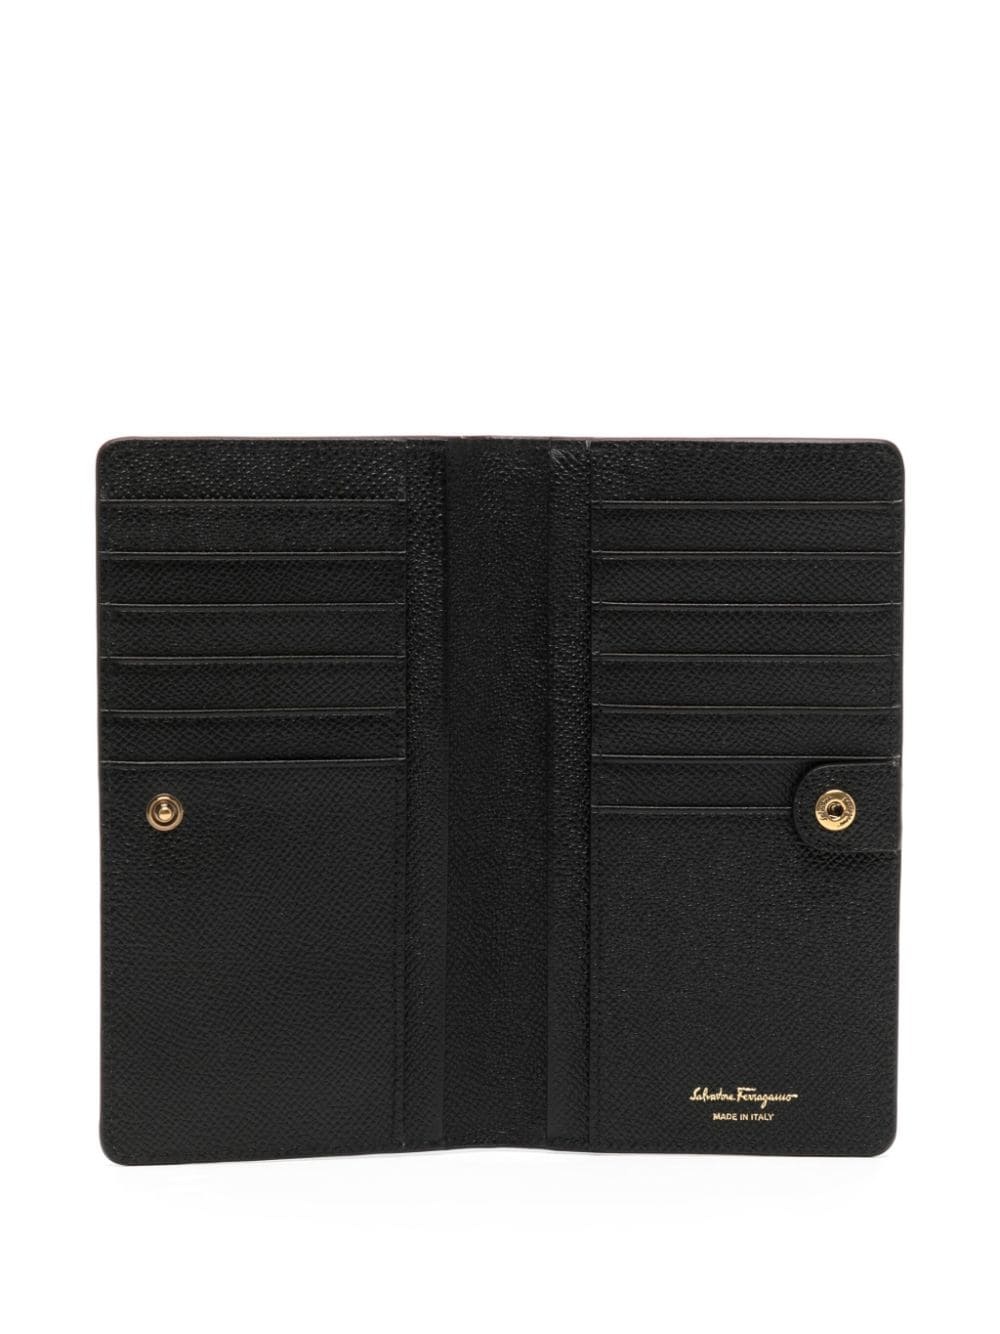 Gancini continental leather wallet - 3